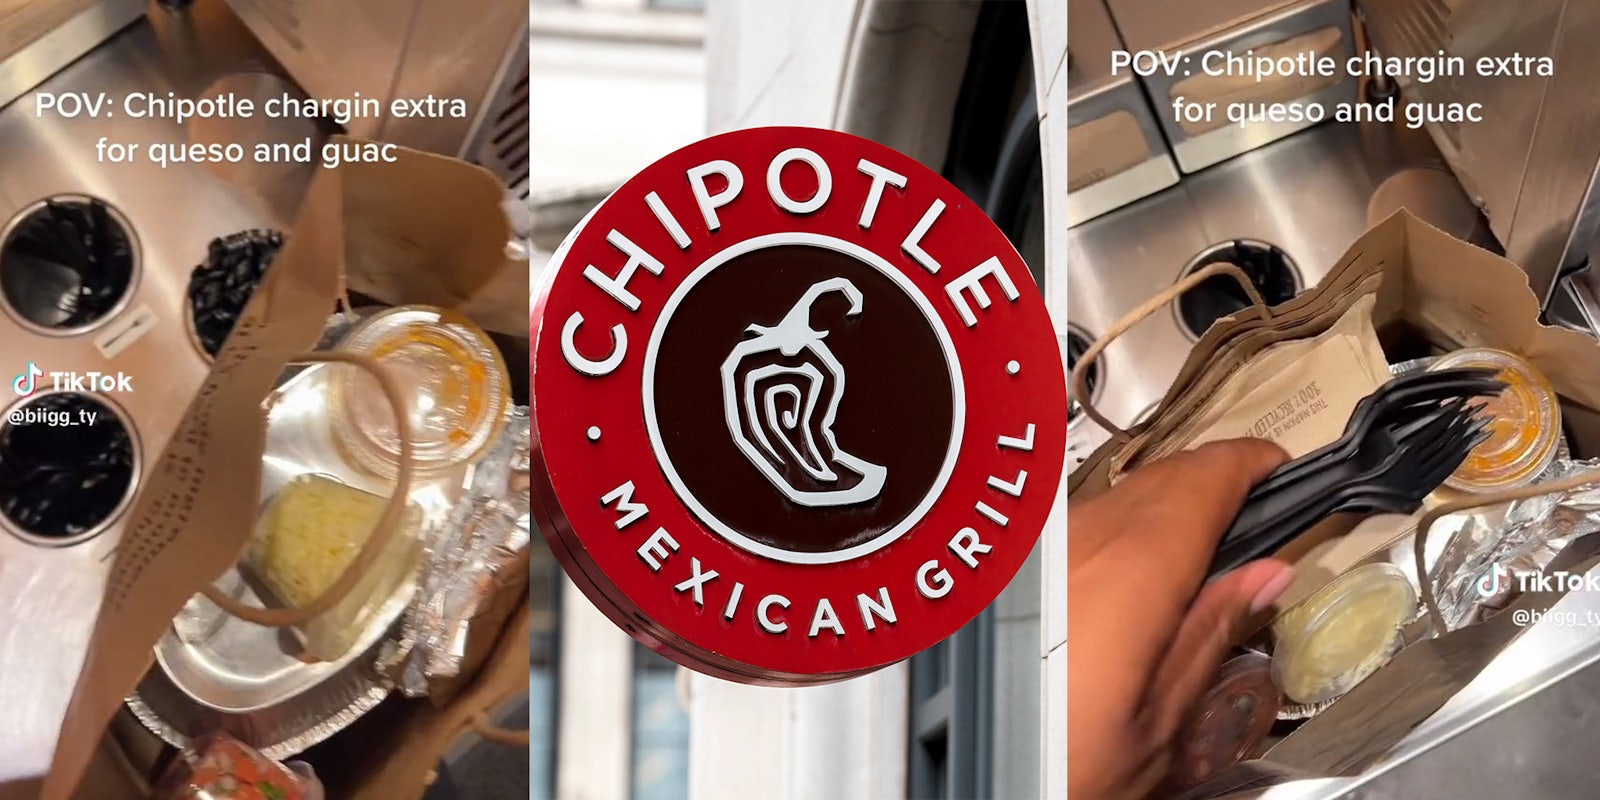 Chipotle customer explains how he gets revenge for guac and queso upcharge